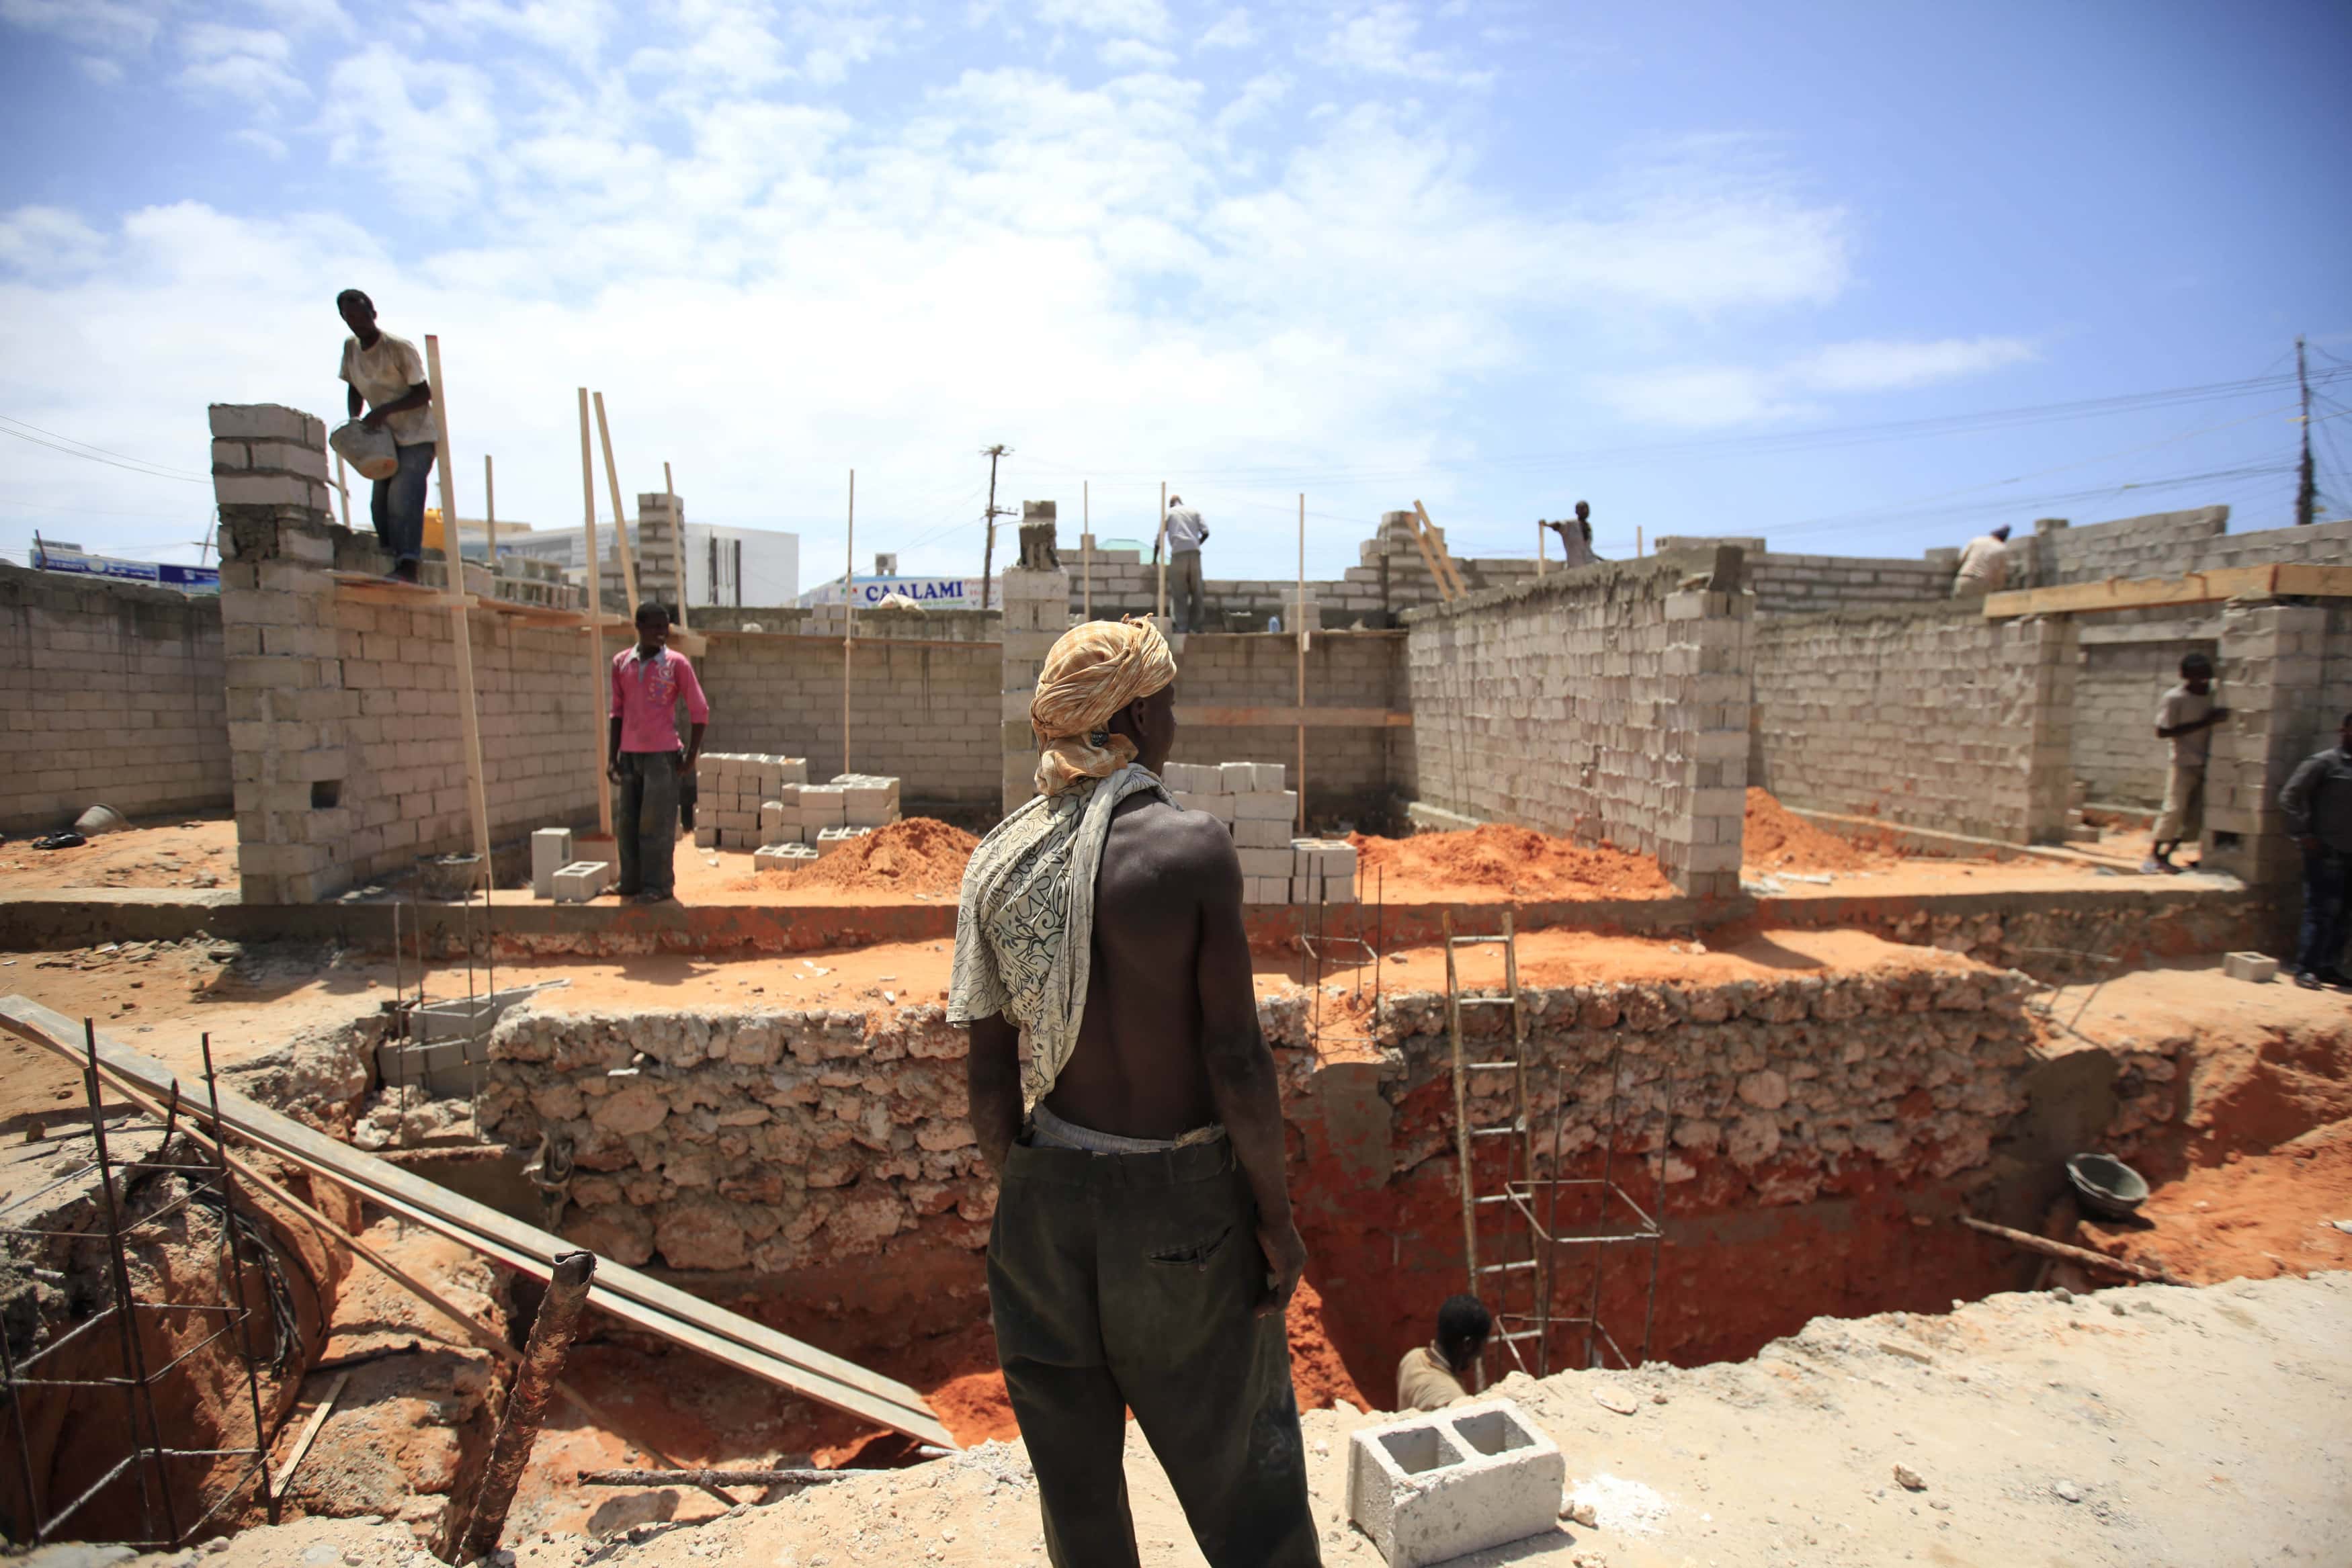 Labourers work at a petrol station construction site in Mogadishu, 24 September 2013., REUTERS/Omar Faruk